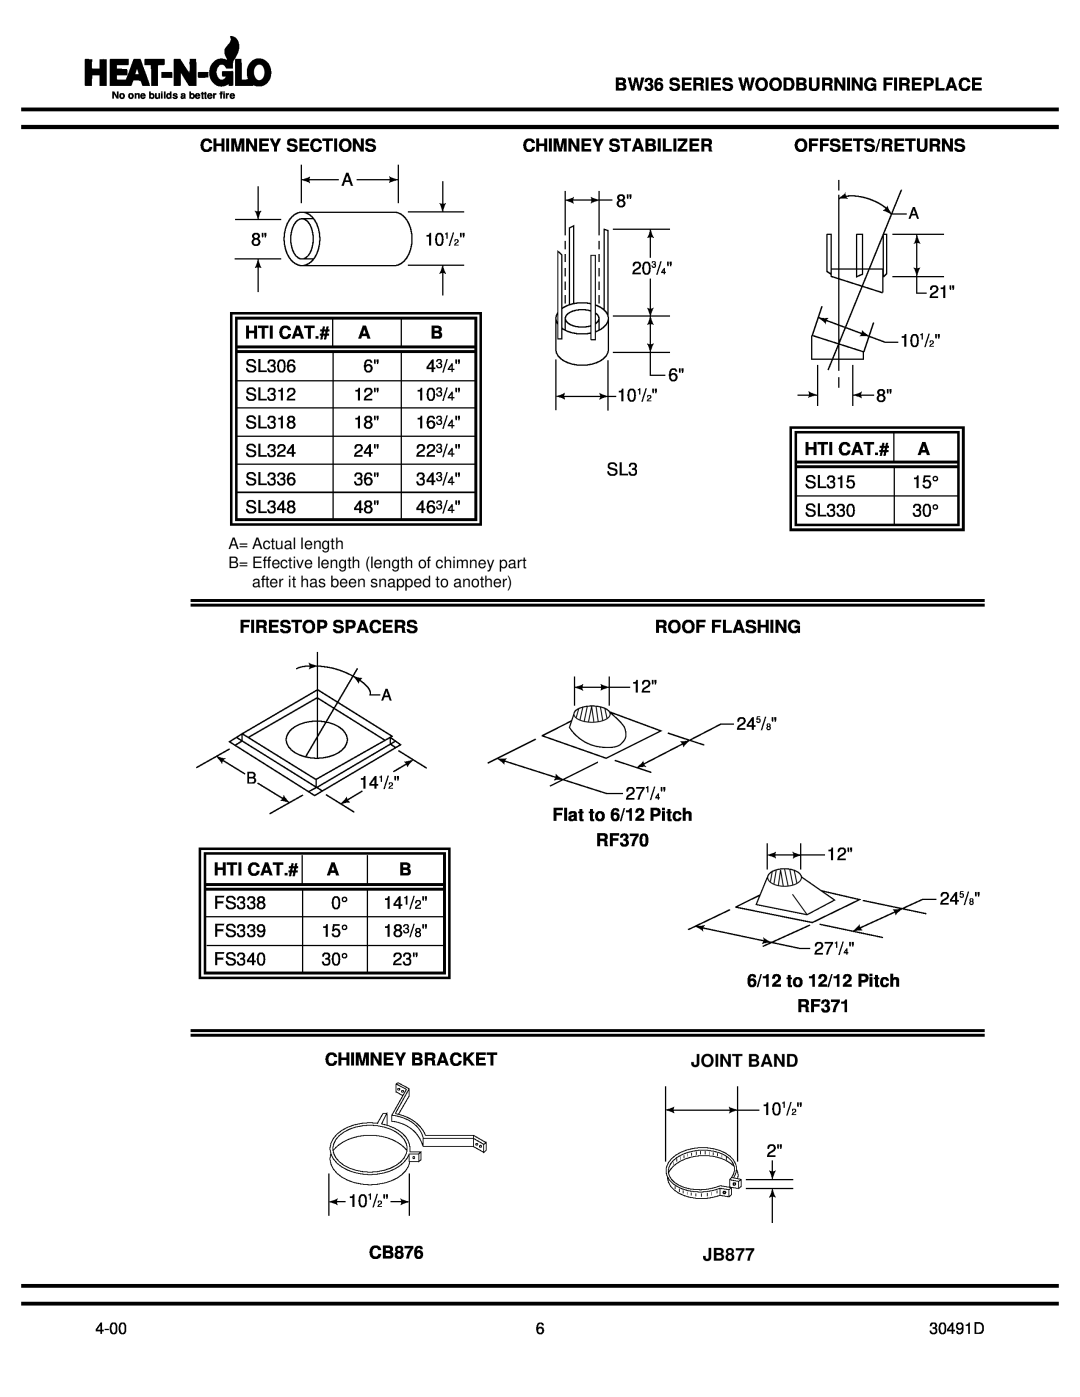 Heat & Glo LifeStyle BW36 Chimney Sections, Chimney Stabilizer, Offsets/Returns, Hti Cat.#, Firestop Spacers, RF370, RF371 